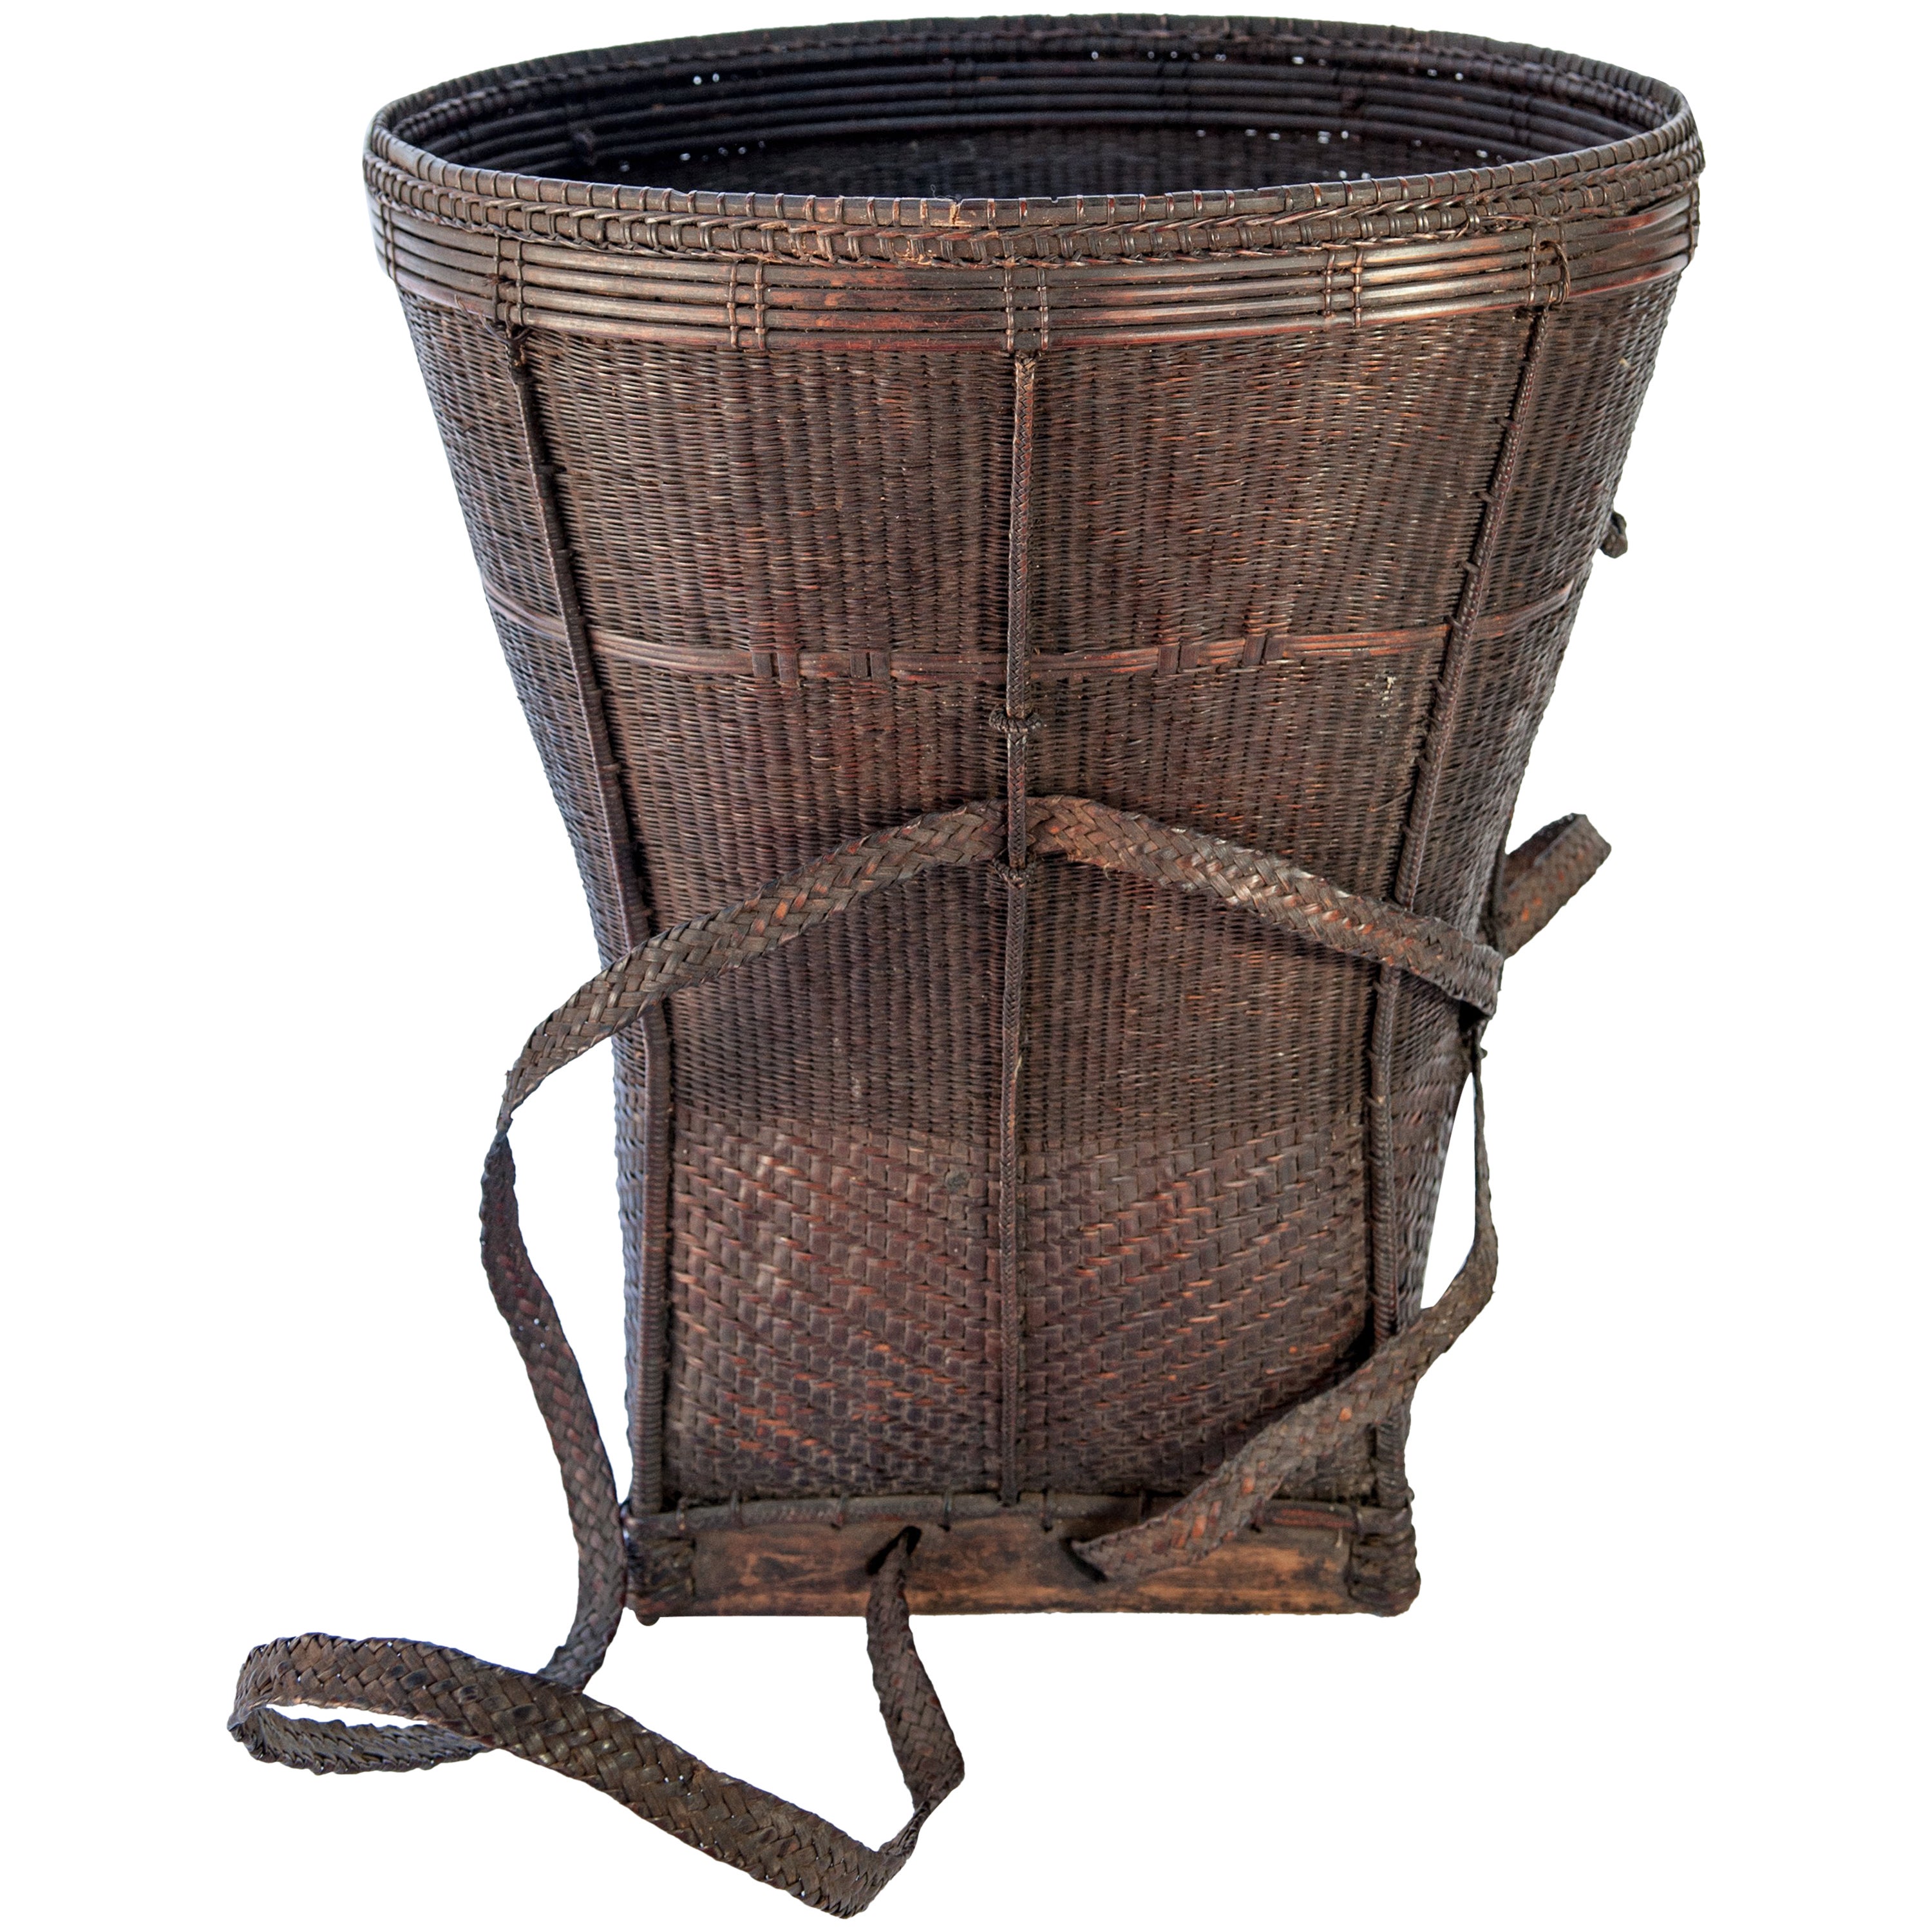 Tribal Storage Basket with Lid. Bhutan. Early to Mid-20th Century. Hide ...